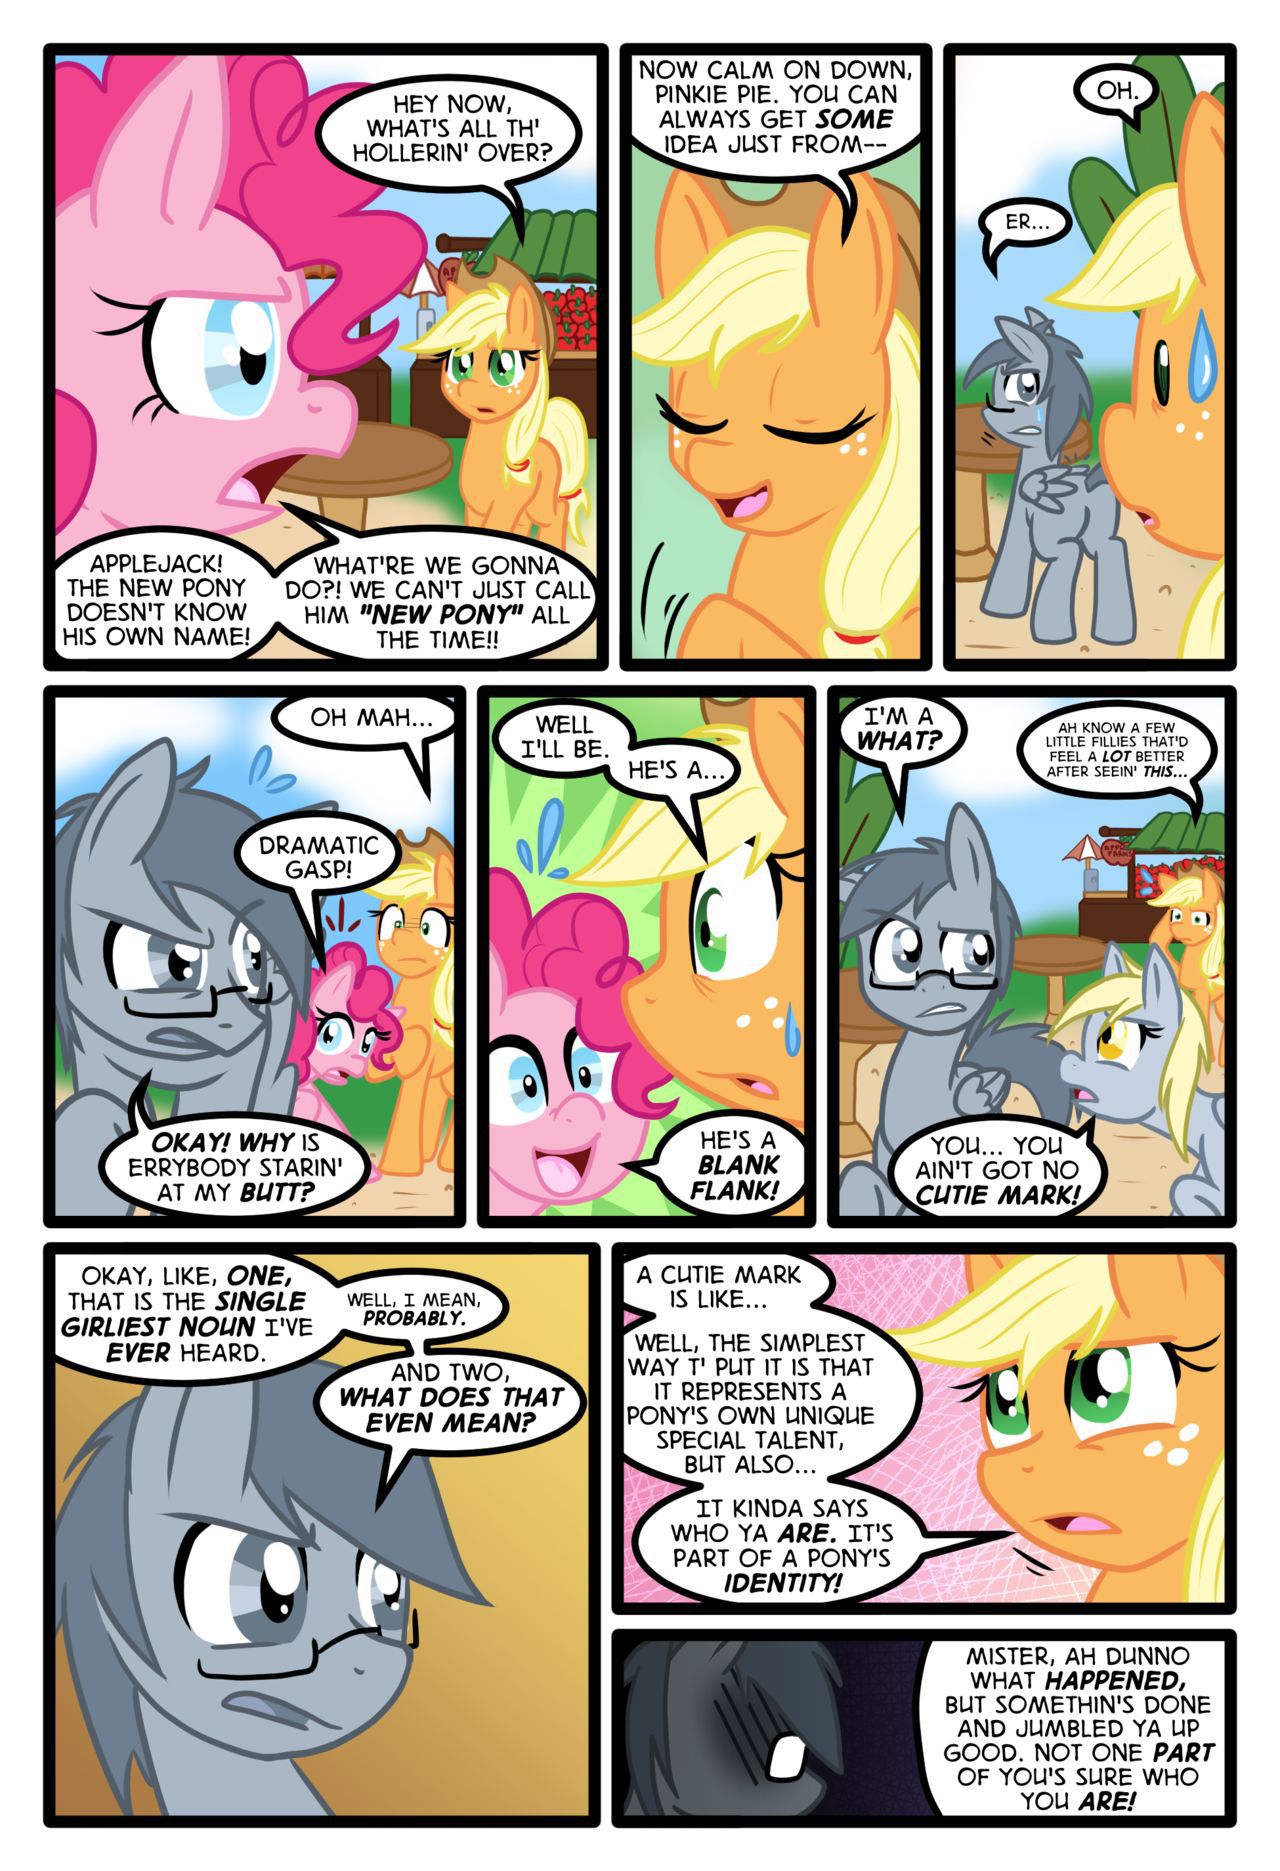 [Zaron] Lonely Hooves (My Little Pony Friendship Is Magic) [Ongoing] 19